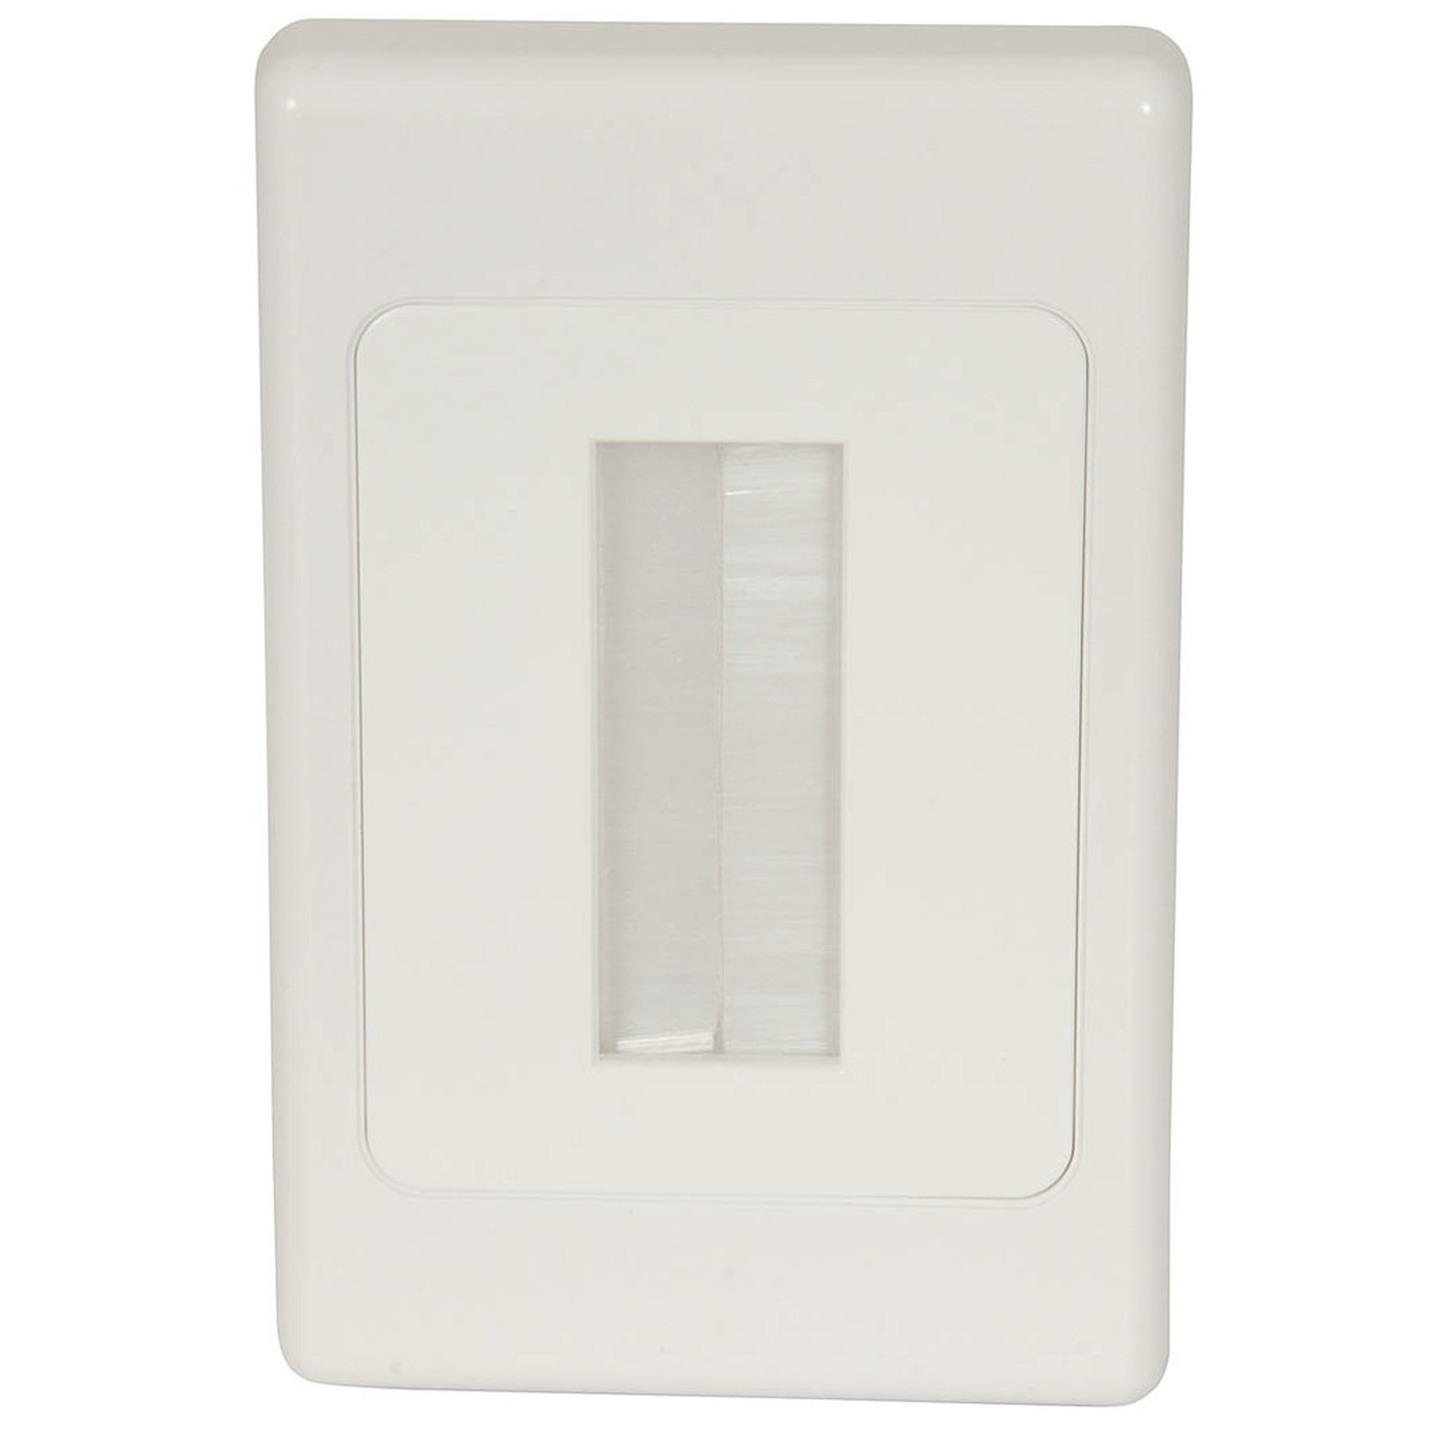 Brush Cable Entry Wall Plate